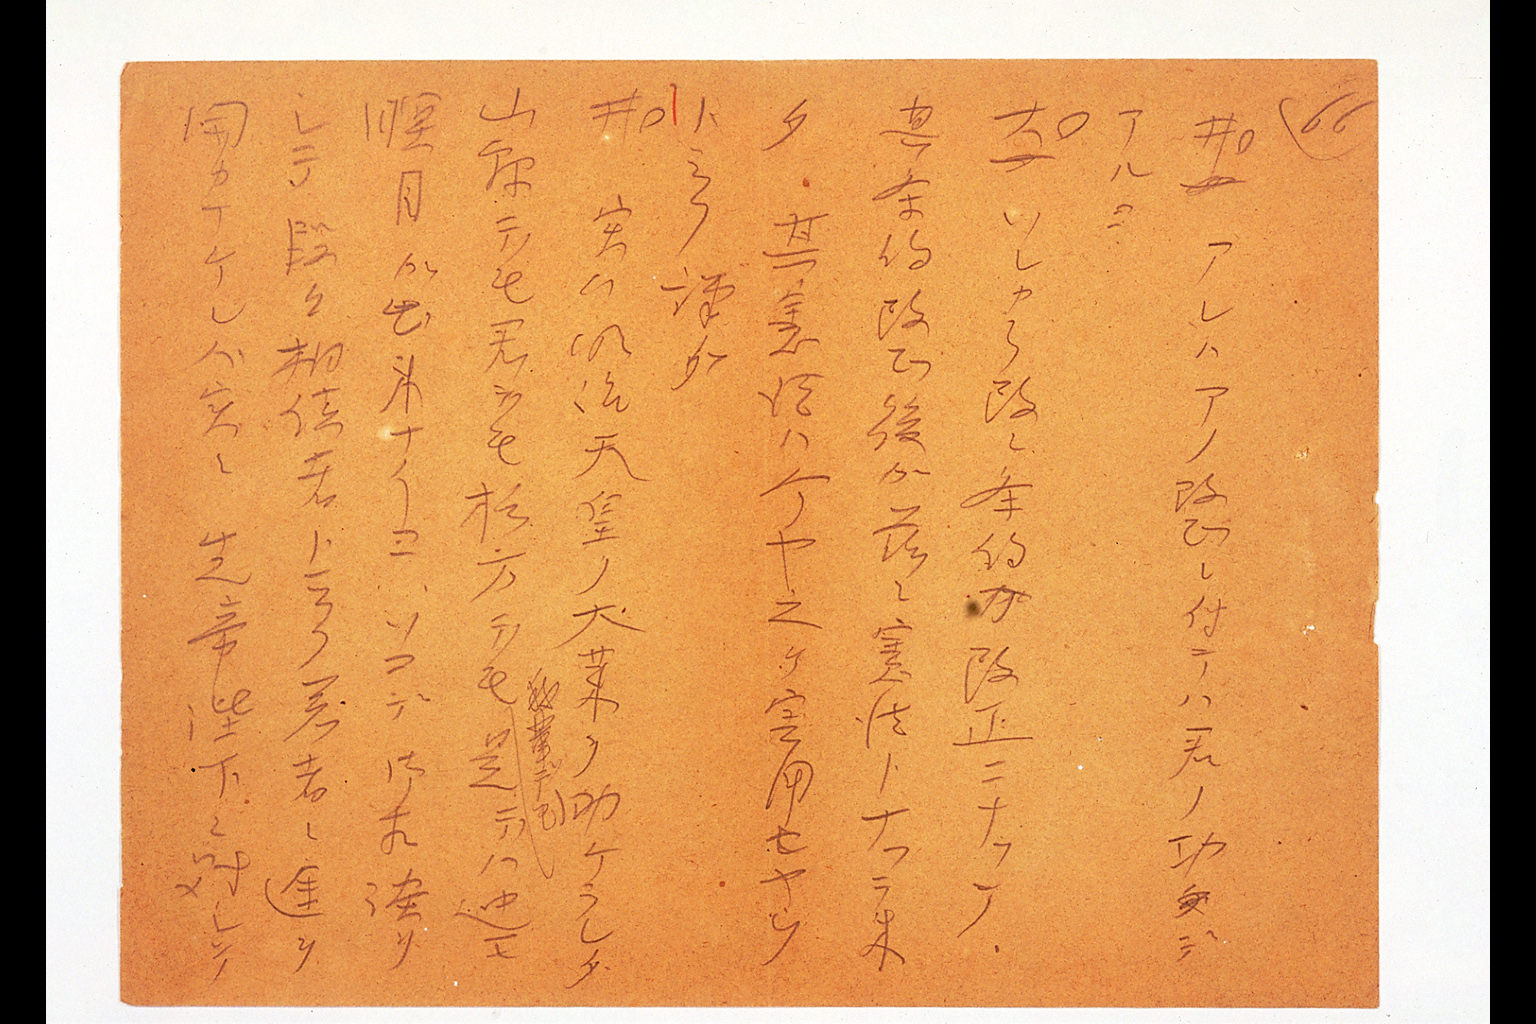 Account Summarizing the Meeting between Marquis INOUE and Count OKUMA(larger)